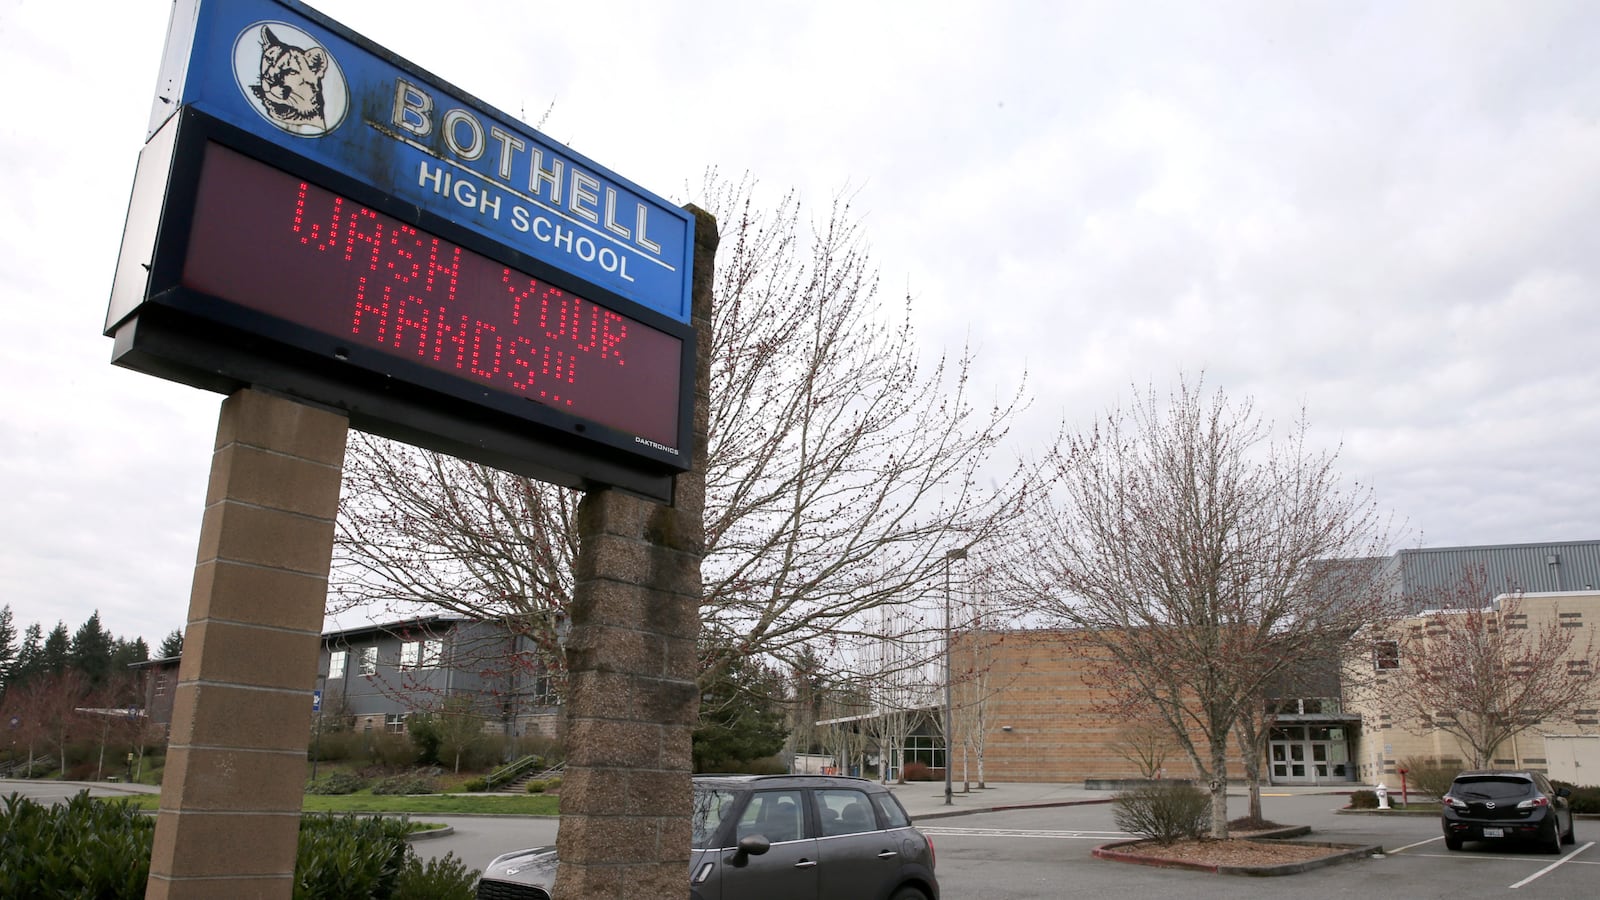 BOTHELL, WA - MARCH 05: All Northshore public school schools closed today for up to two weeks in response to the novel coronavirus, COVID-19, on March 5, 2020 in Bothell, Washington. The district plans to transition instruction from classroom to cloud (online learning).  (Photo by Karen Ducey/Getty Images)